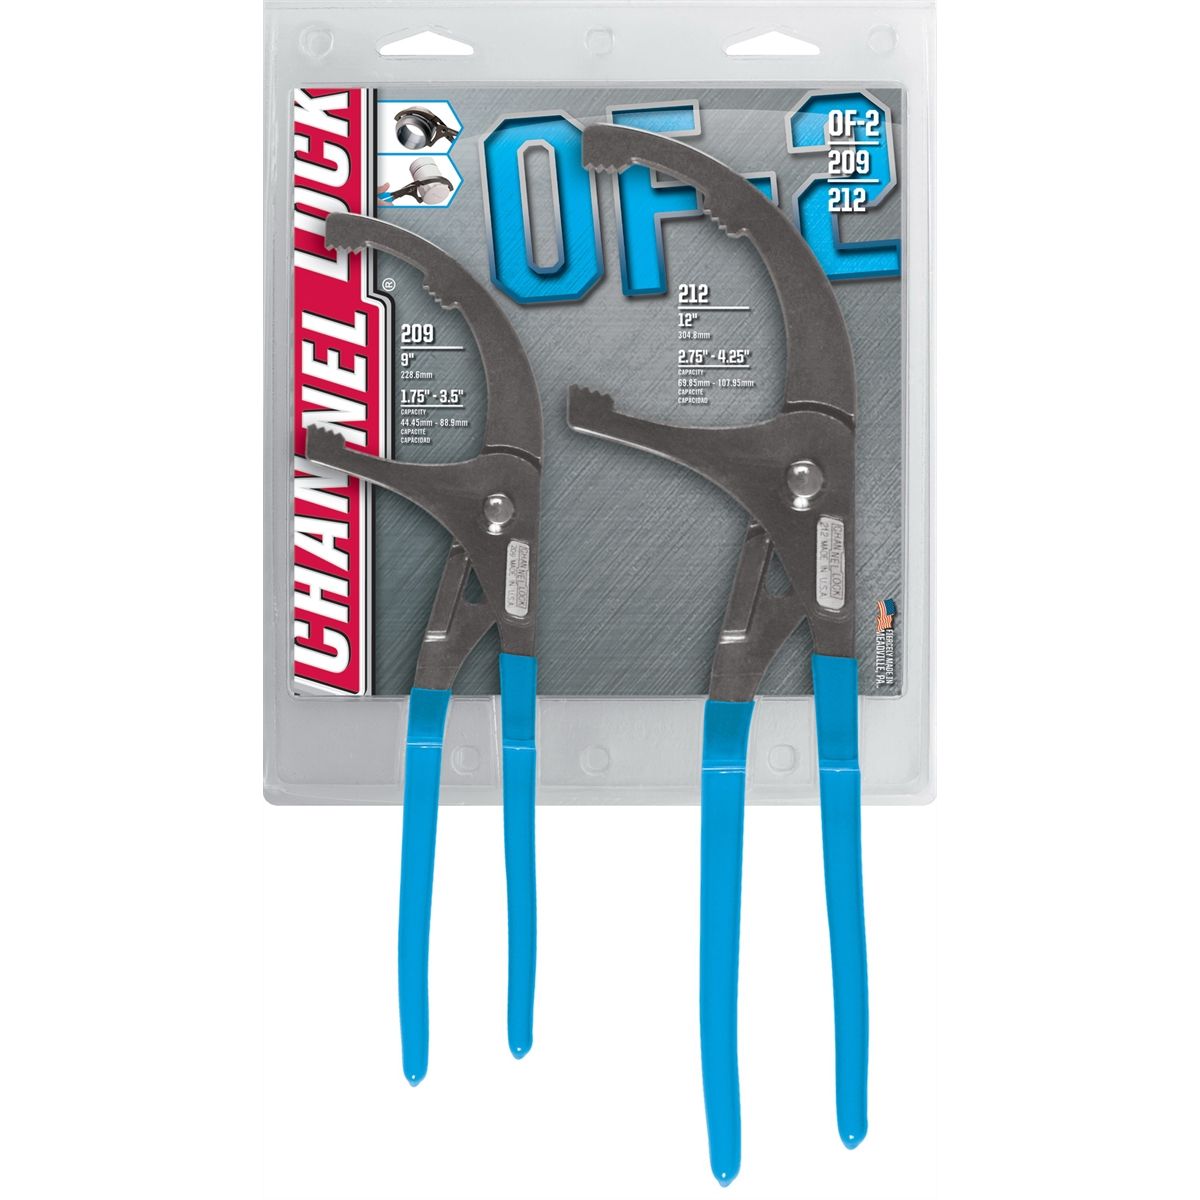 2 PC. OIL FILTER PLIER SET 9" and 12" Pliers...